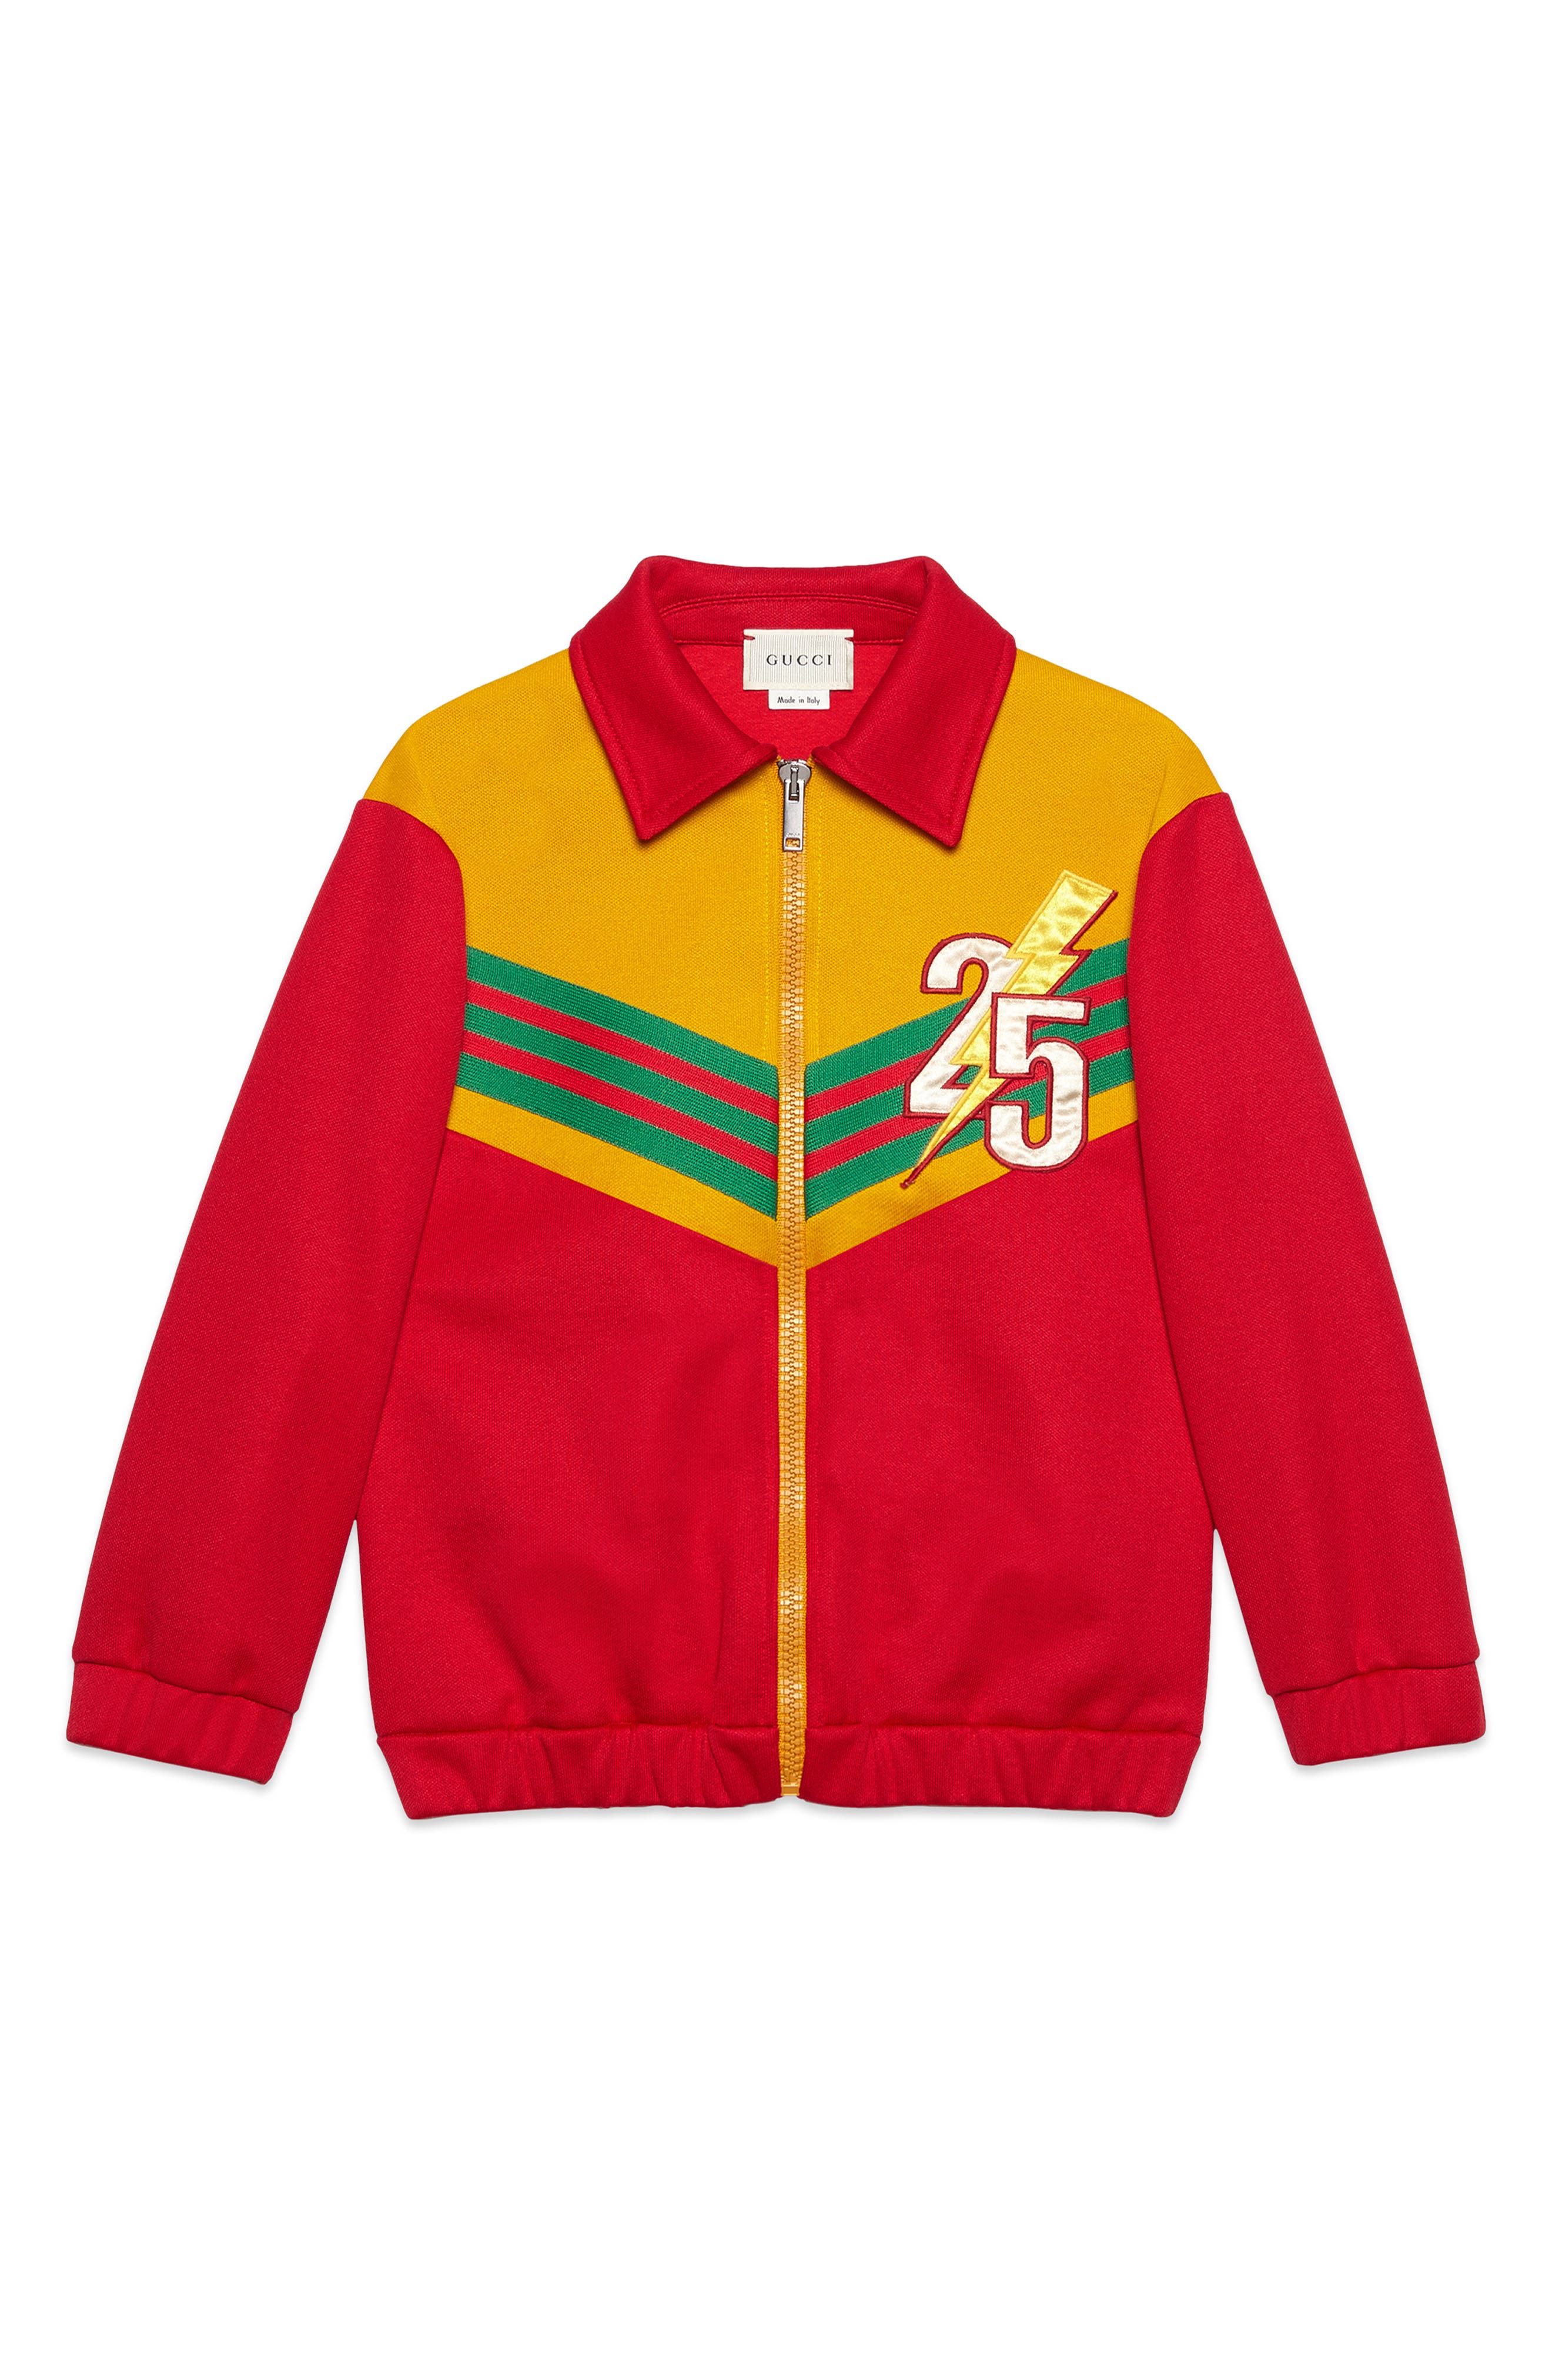 gucci jacket for boys